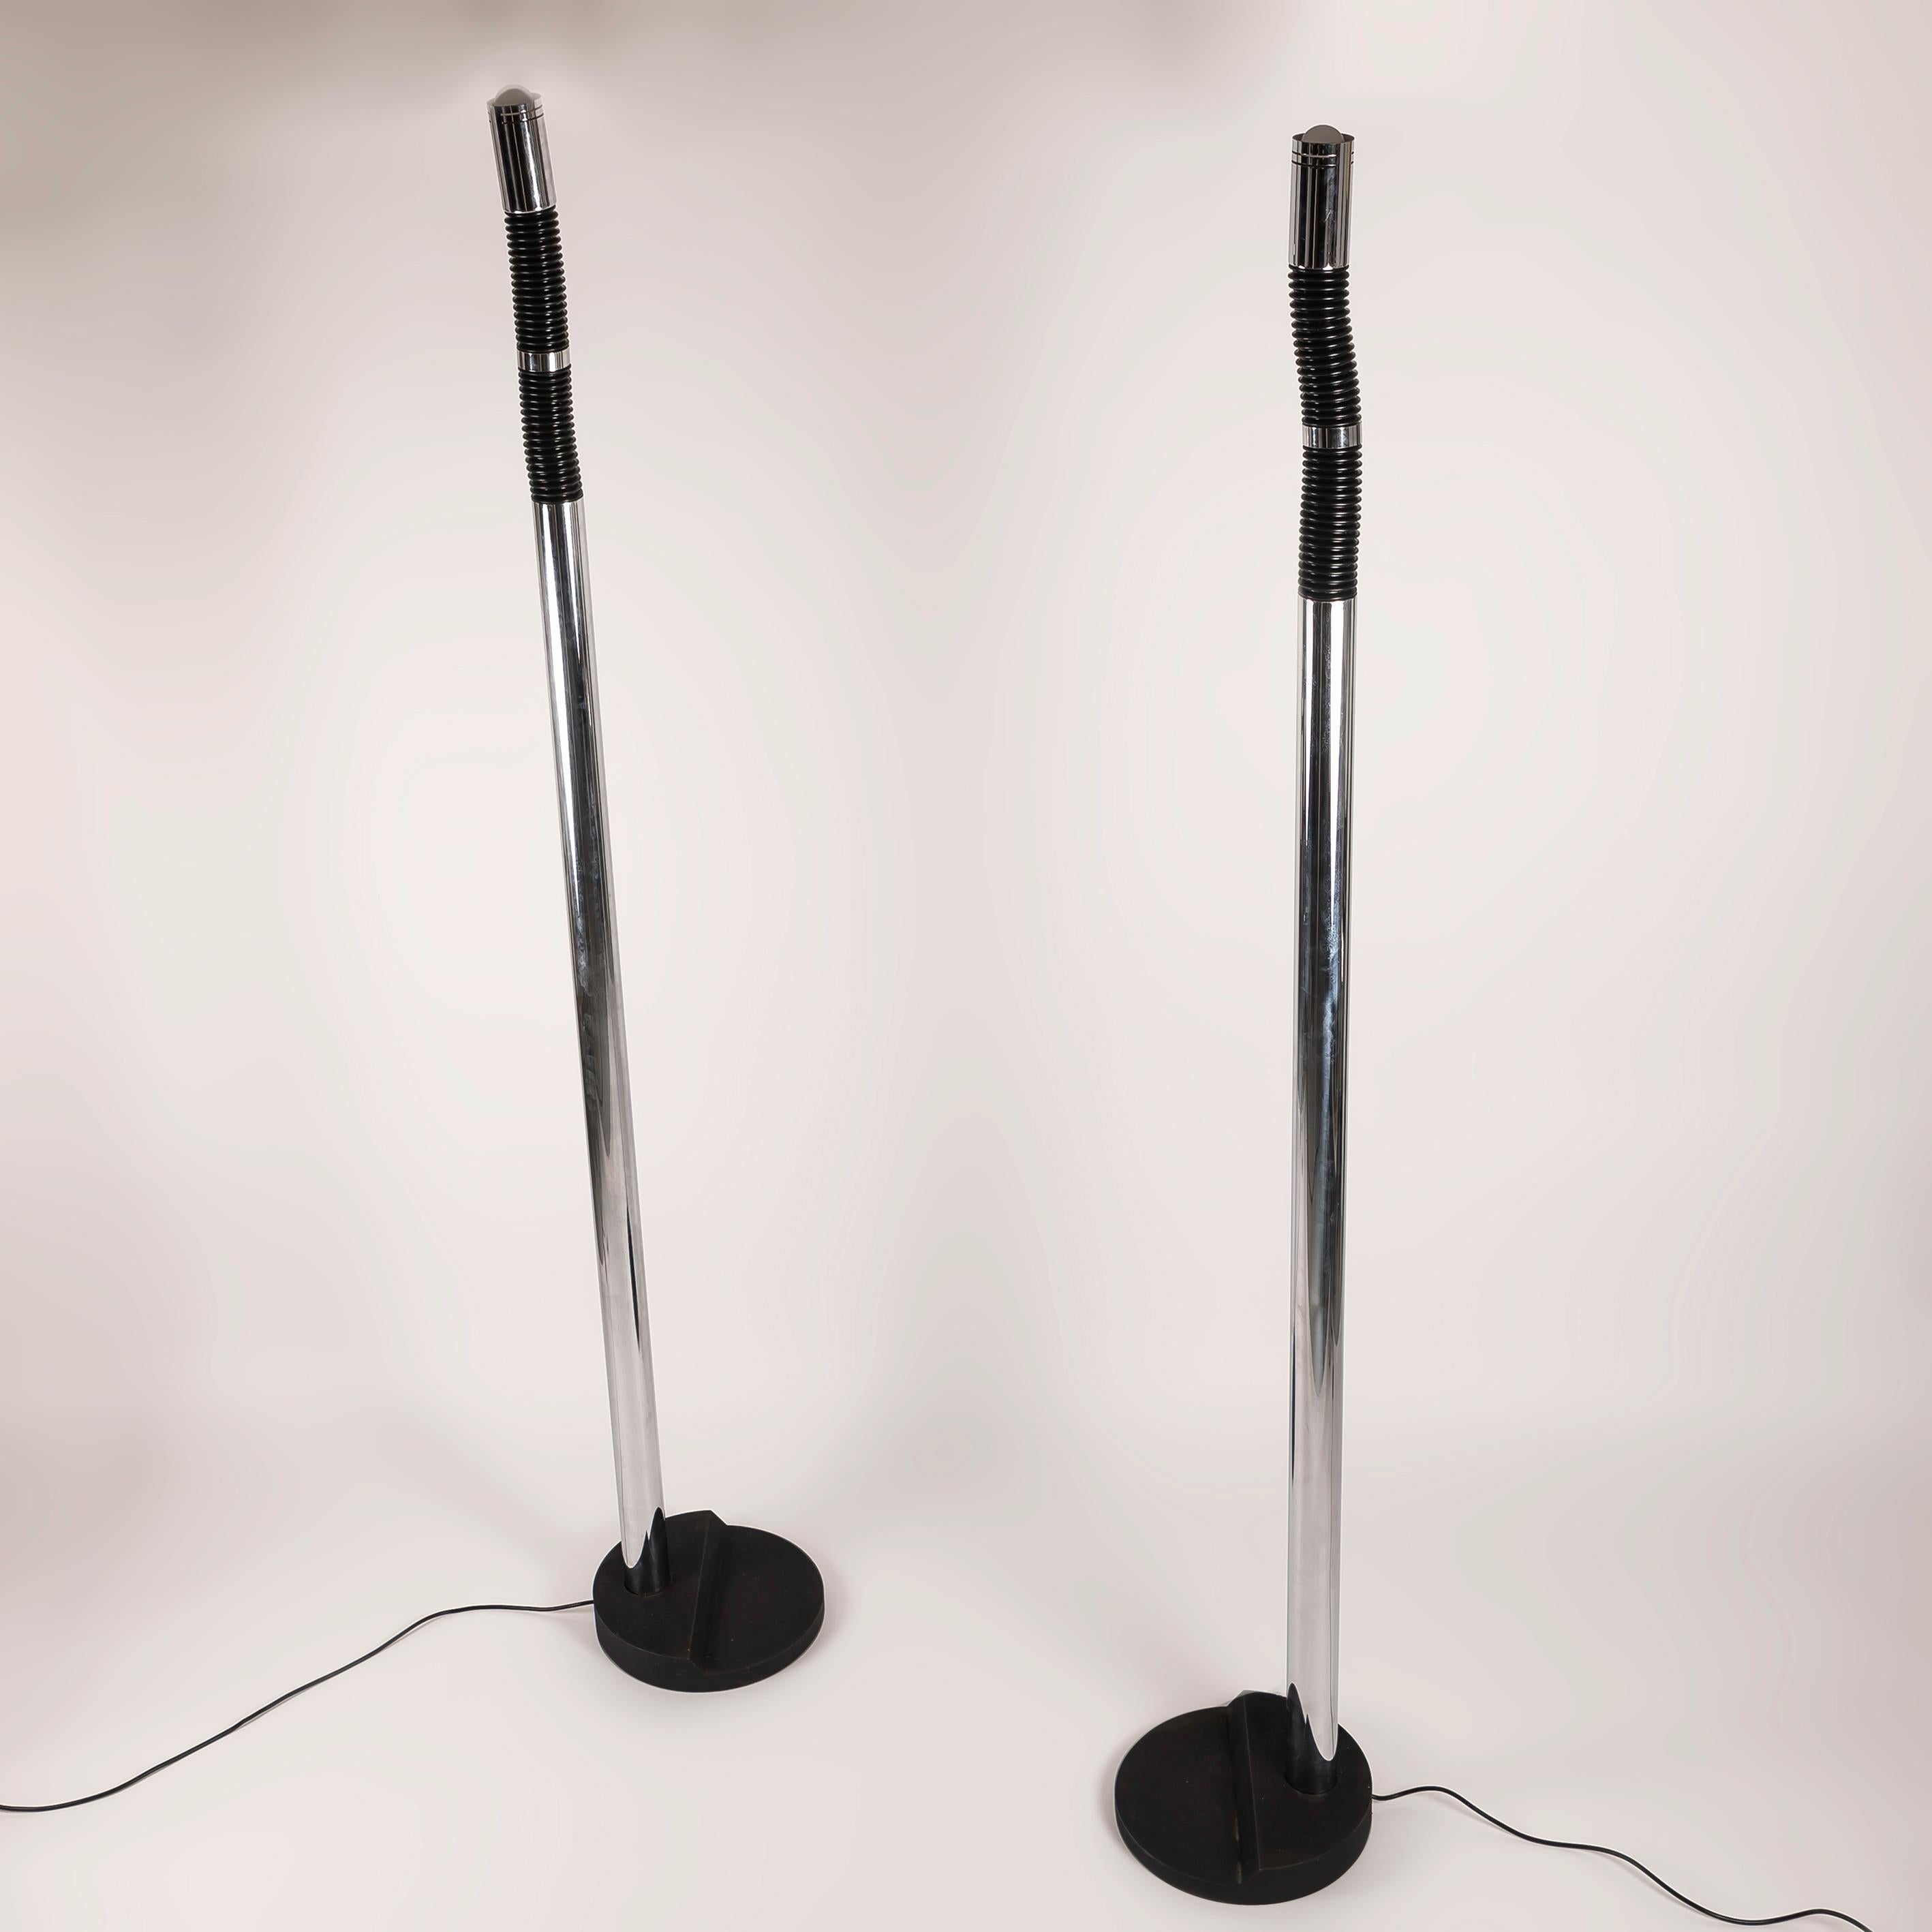 Space Age Italian Floor Lamps in Lacquered Iron and Chromed Metal, 1970s For Sale 2